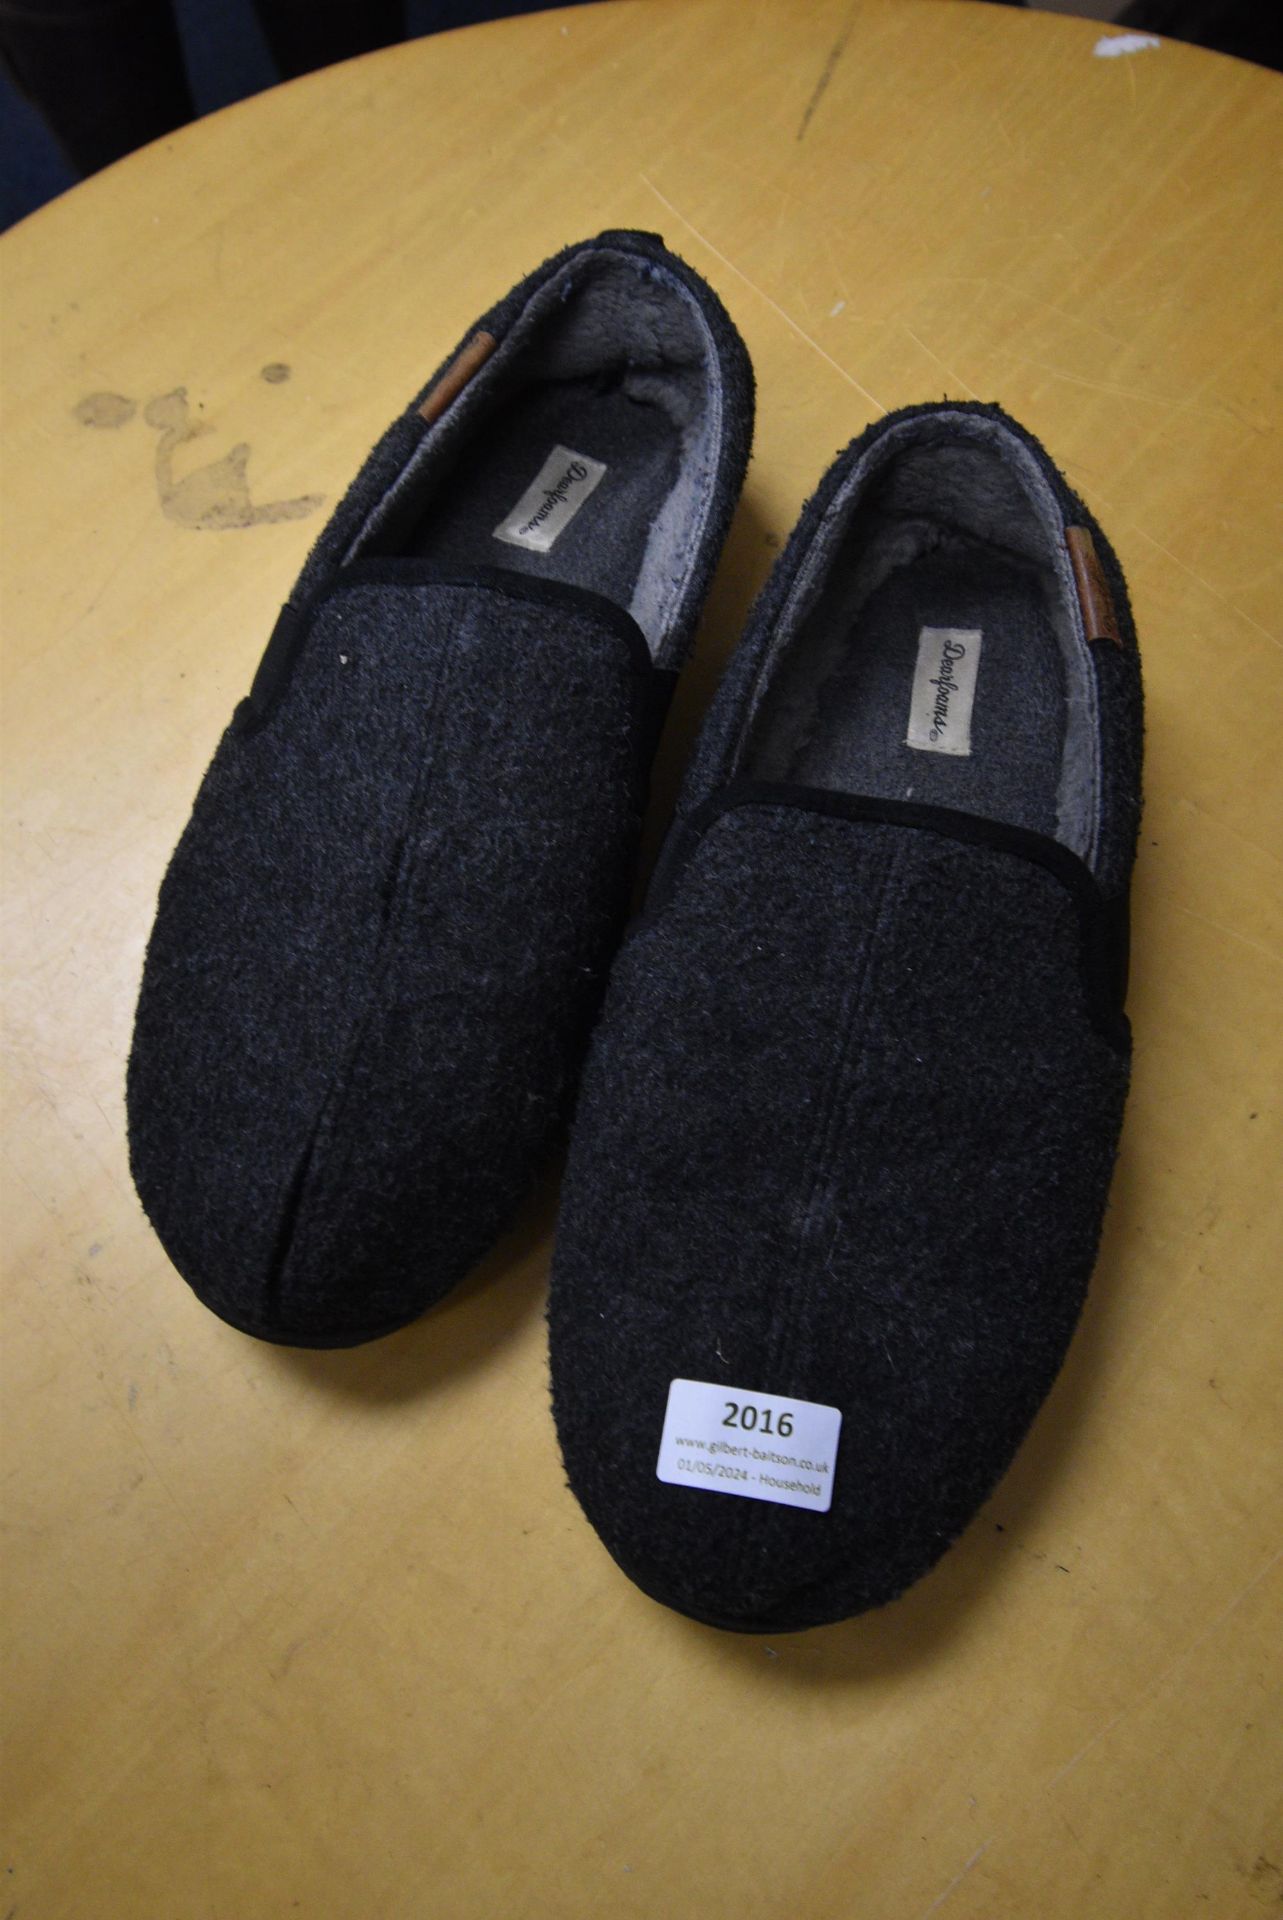 *Gent’s Slippers Size: EU 46-47